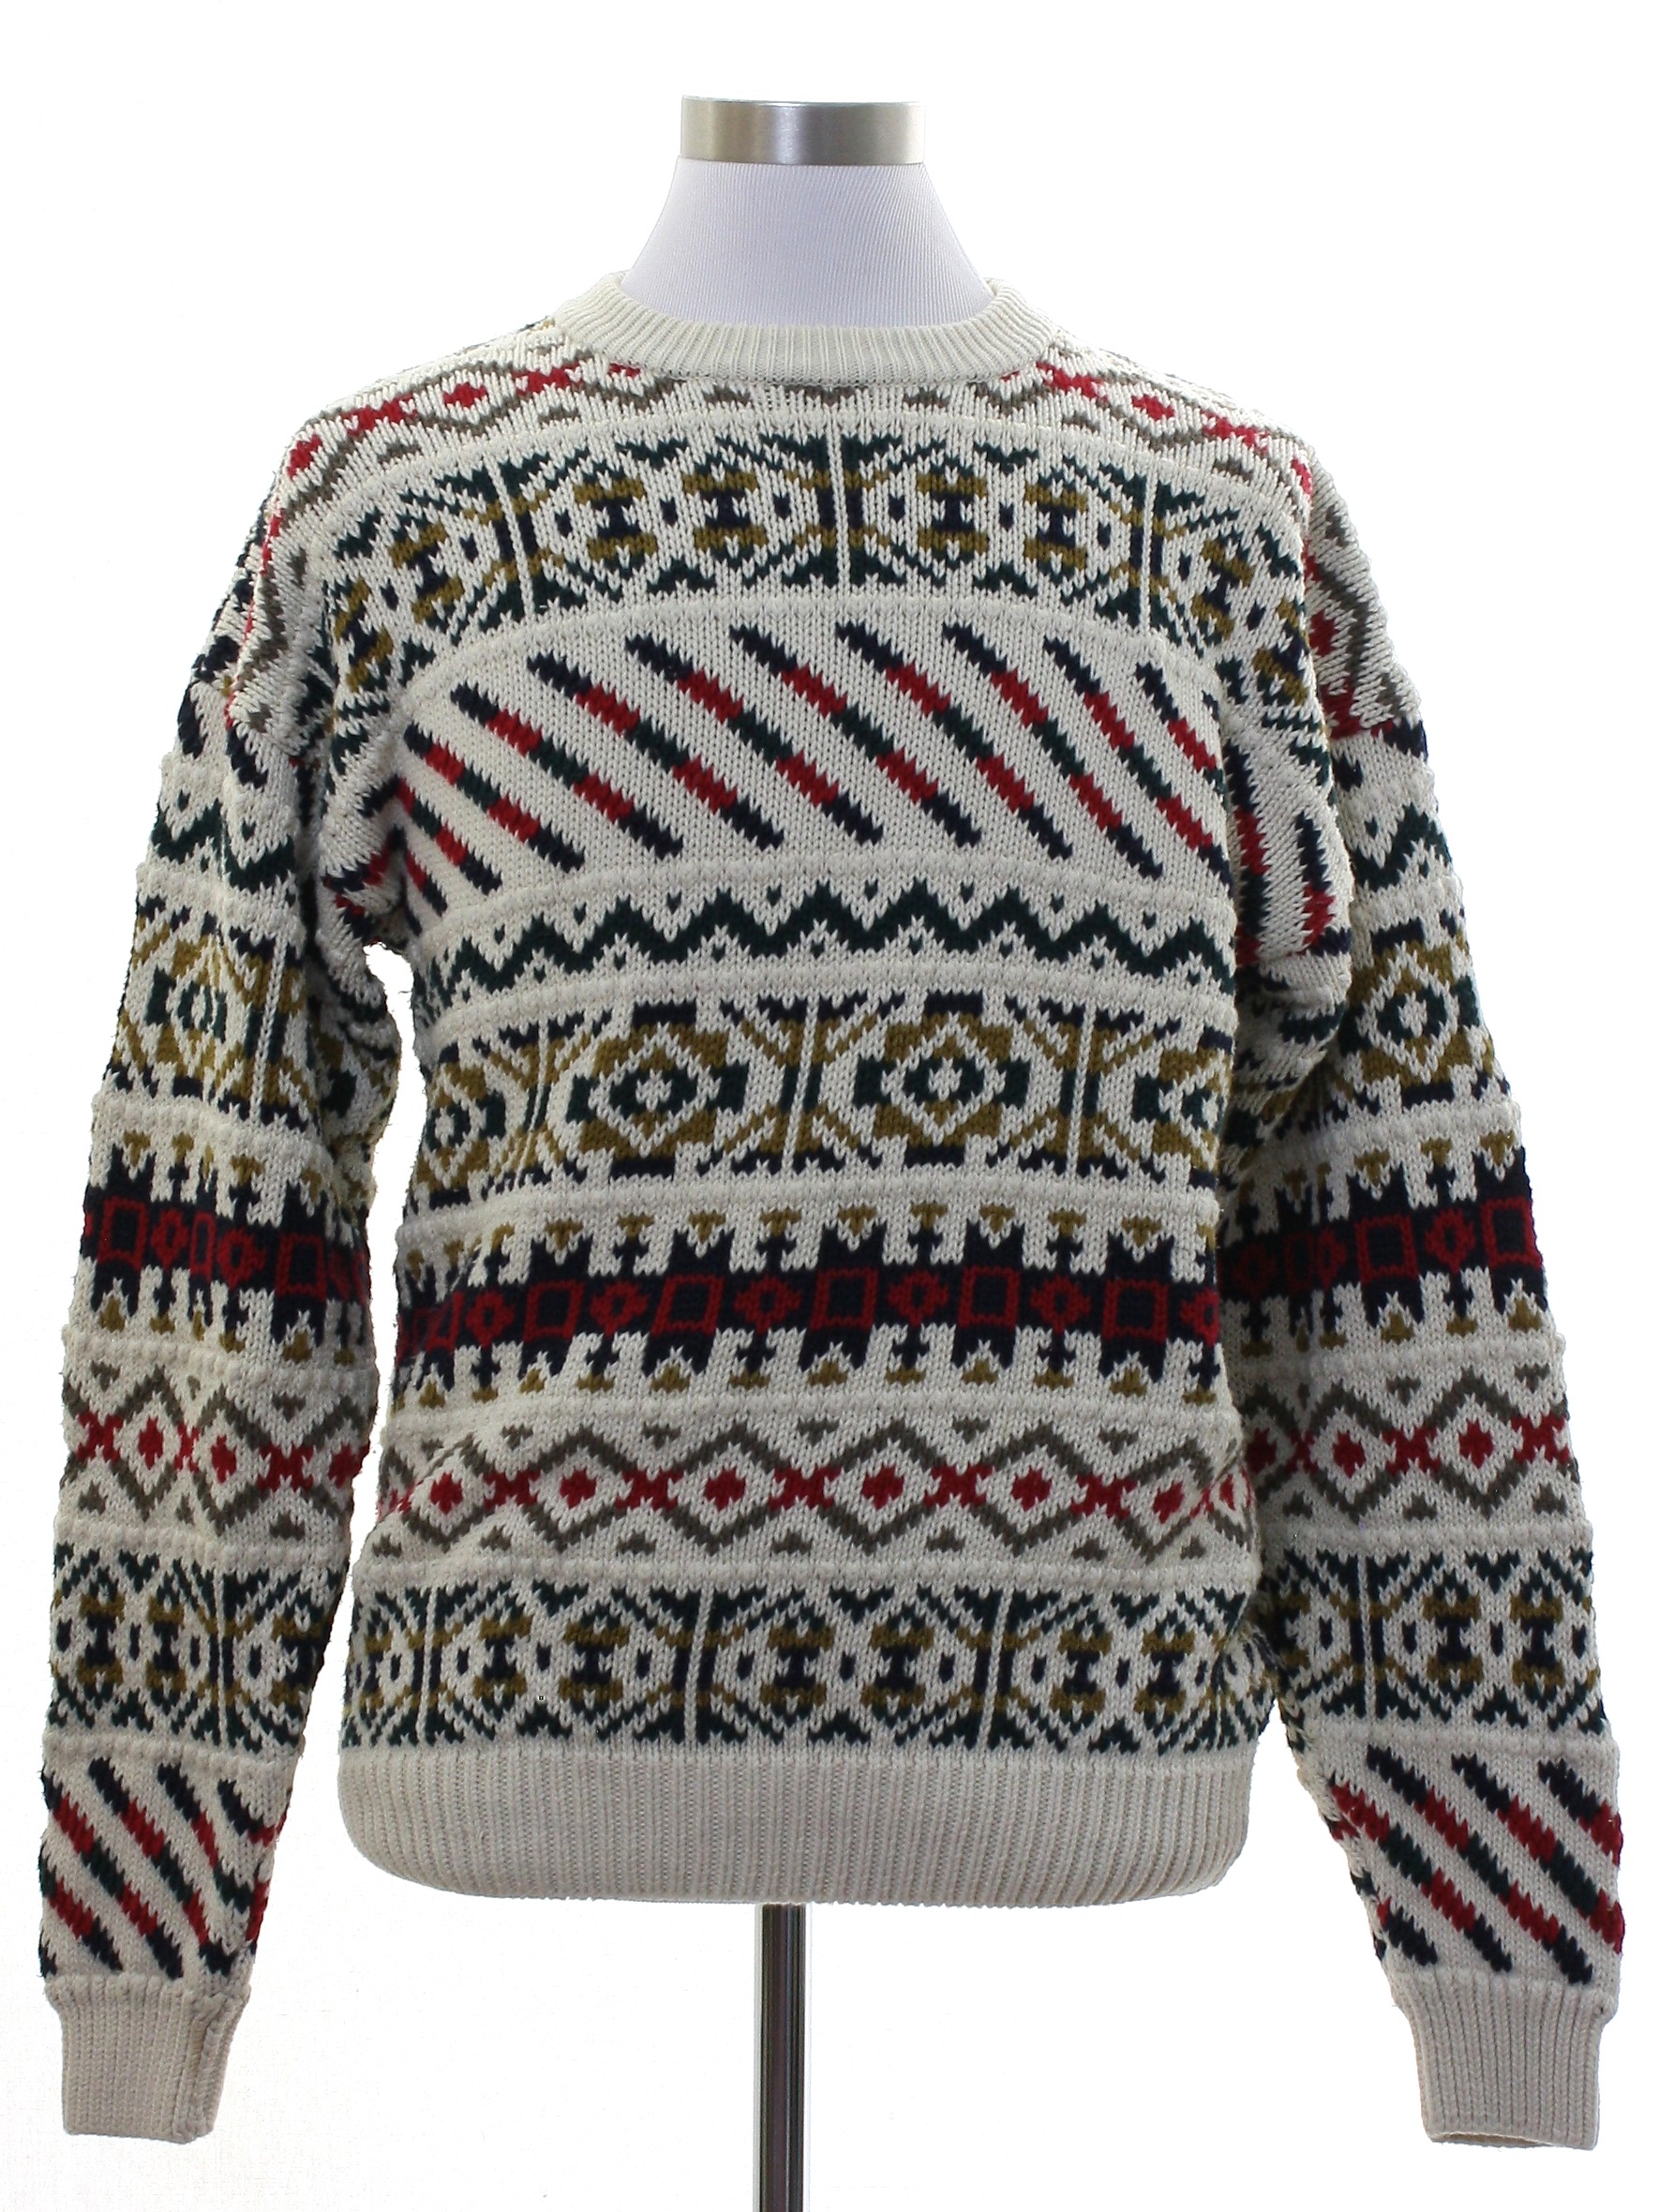 Retro 80's Sweater: 80s style (made in 90s) -Current Editions- Mens ...